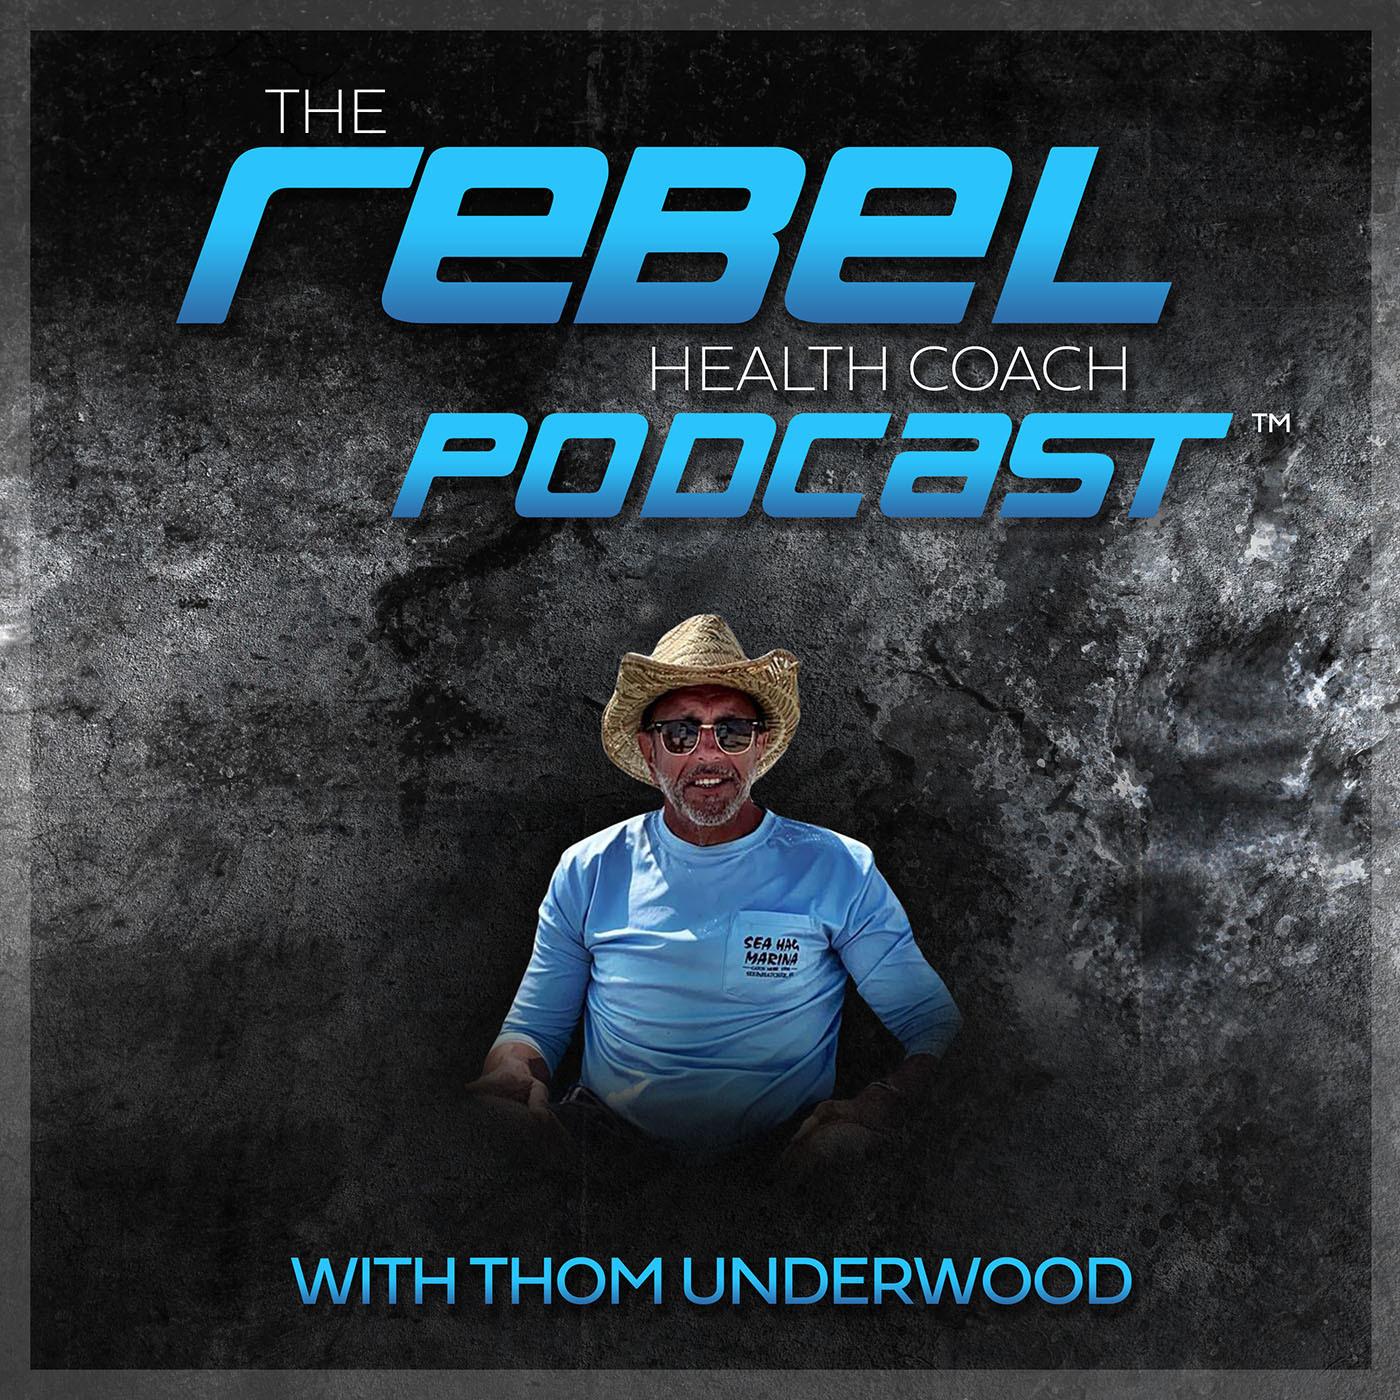 Artwork for podcast The Rebel Health Coach